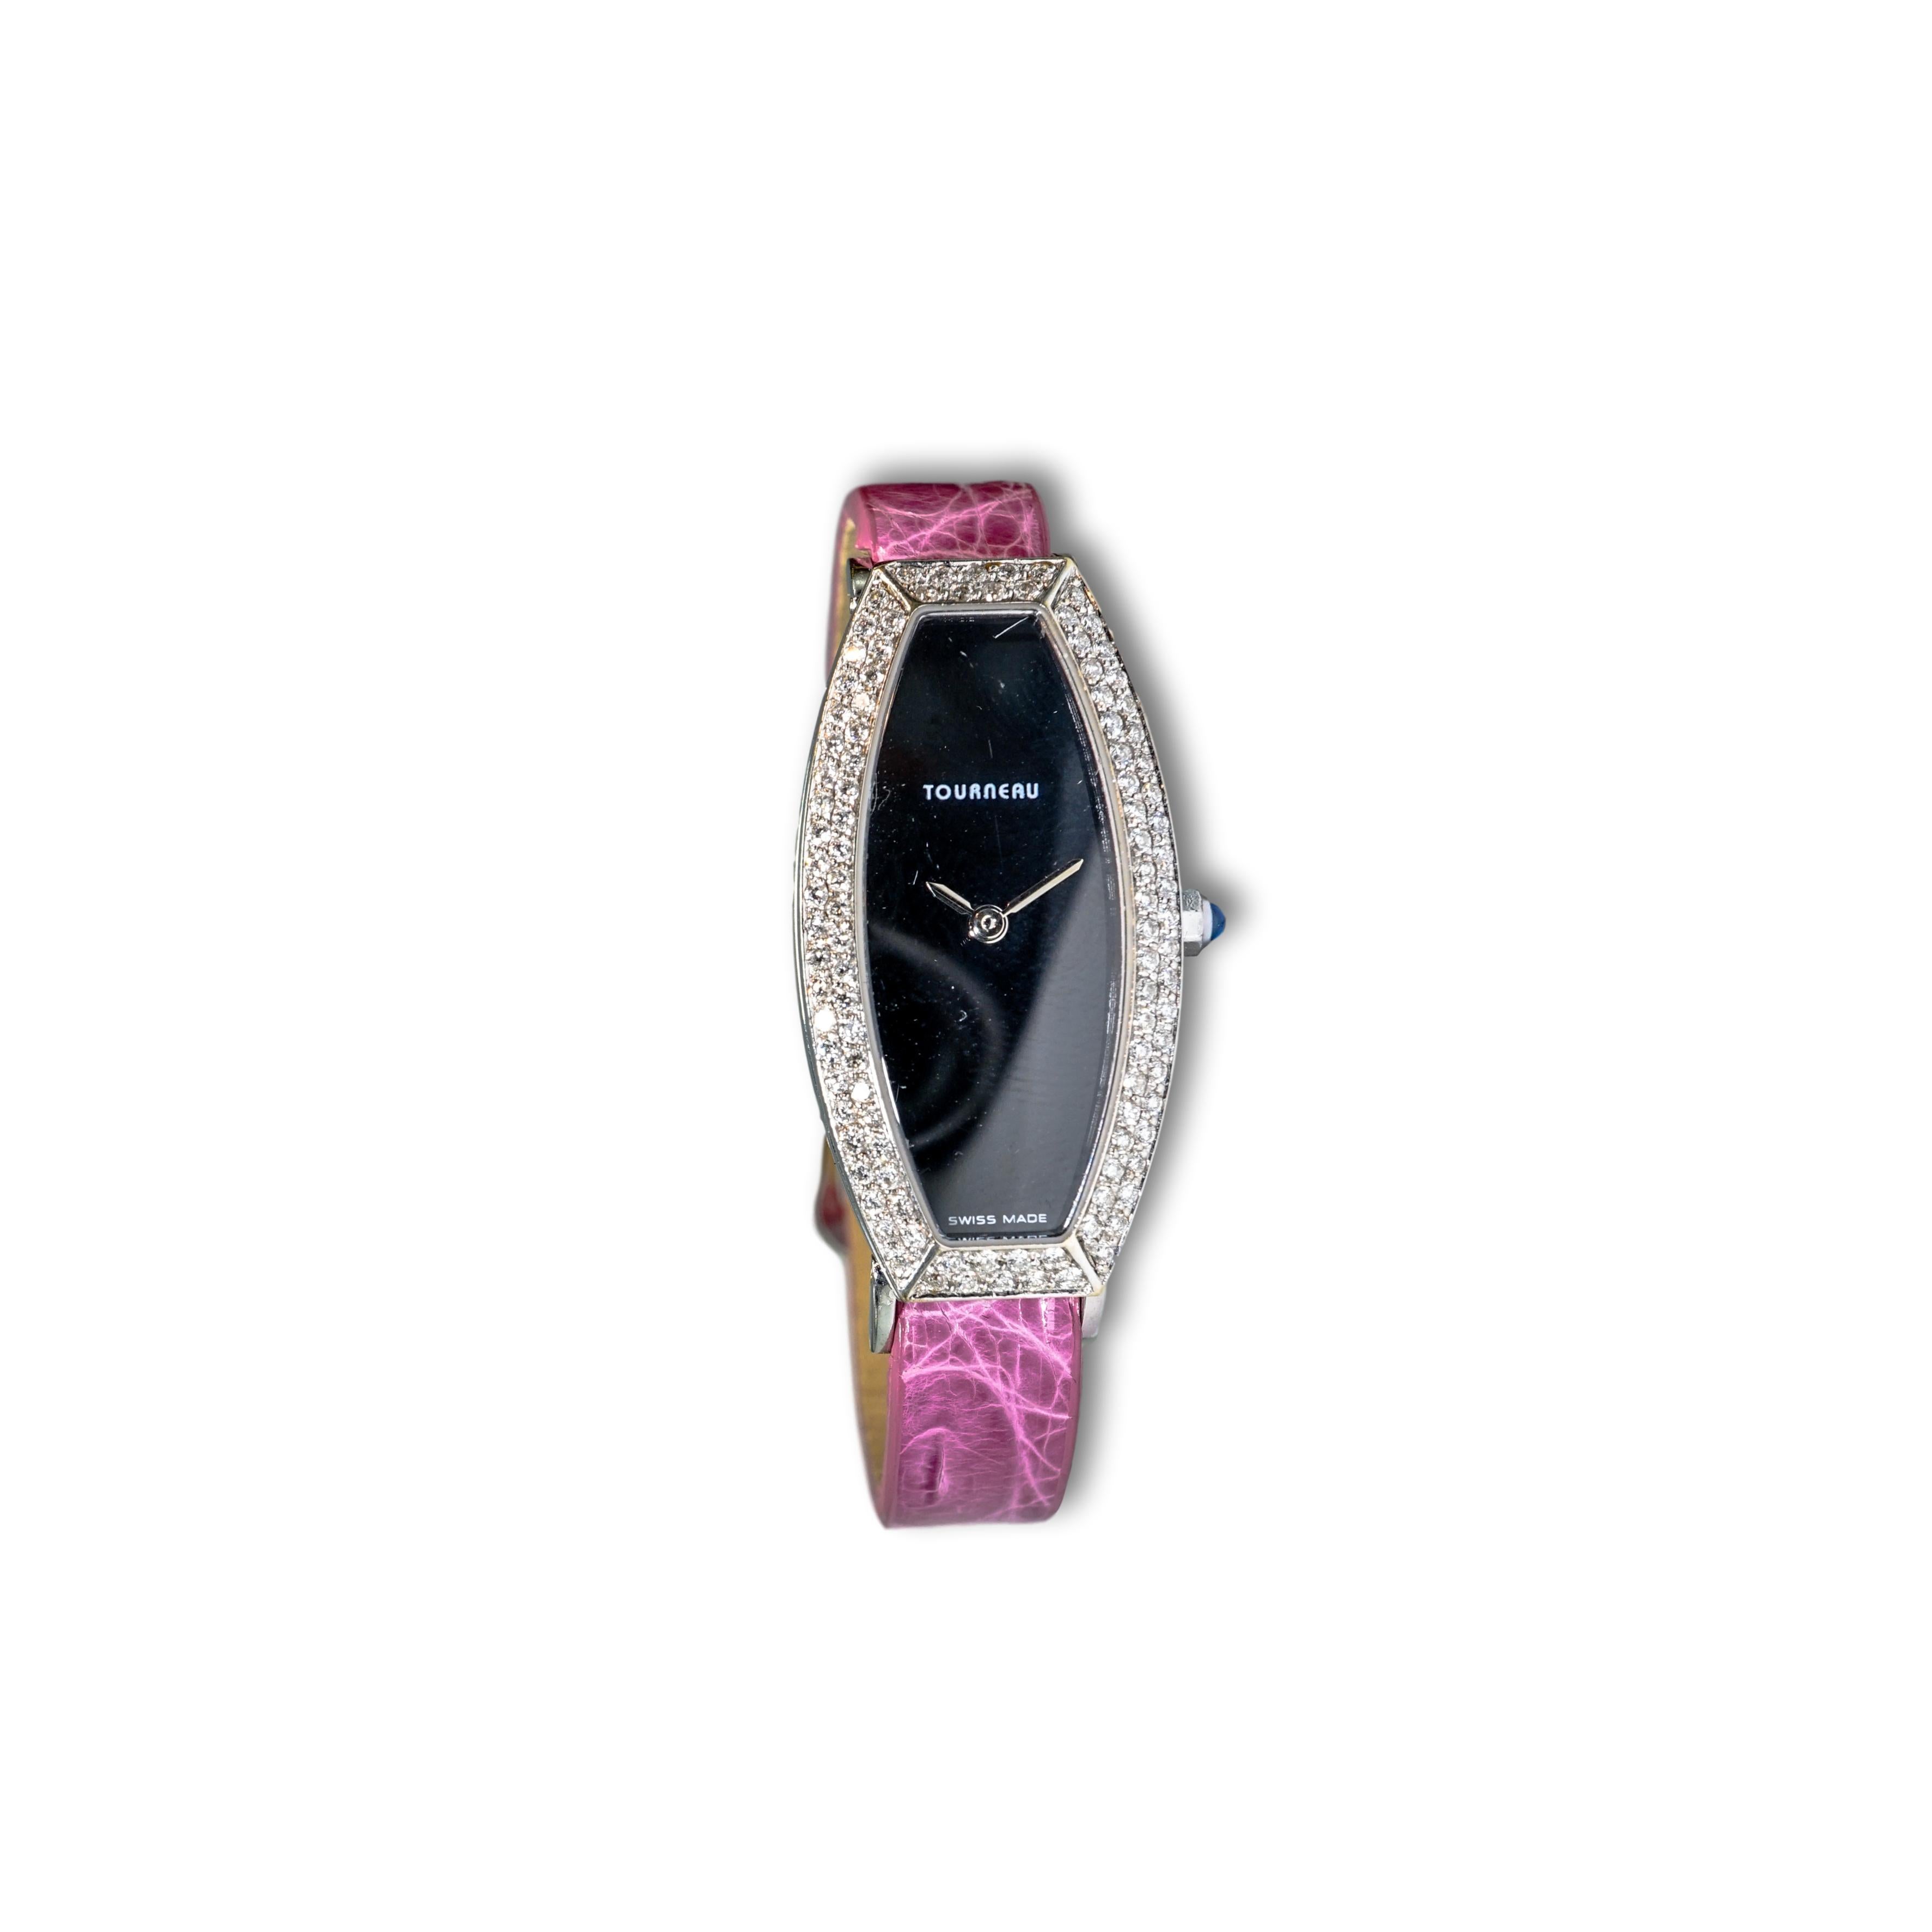 This modern Tourneru watch is 18K White Gold, it sports surrounding Diamonds and a Mother Of Pearl watch face, it is thought to be created in the late 1980s. 

SKU#W-00784